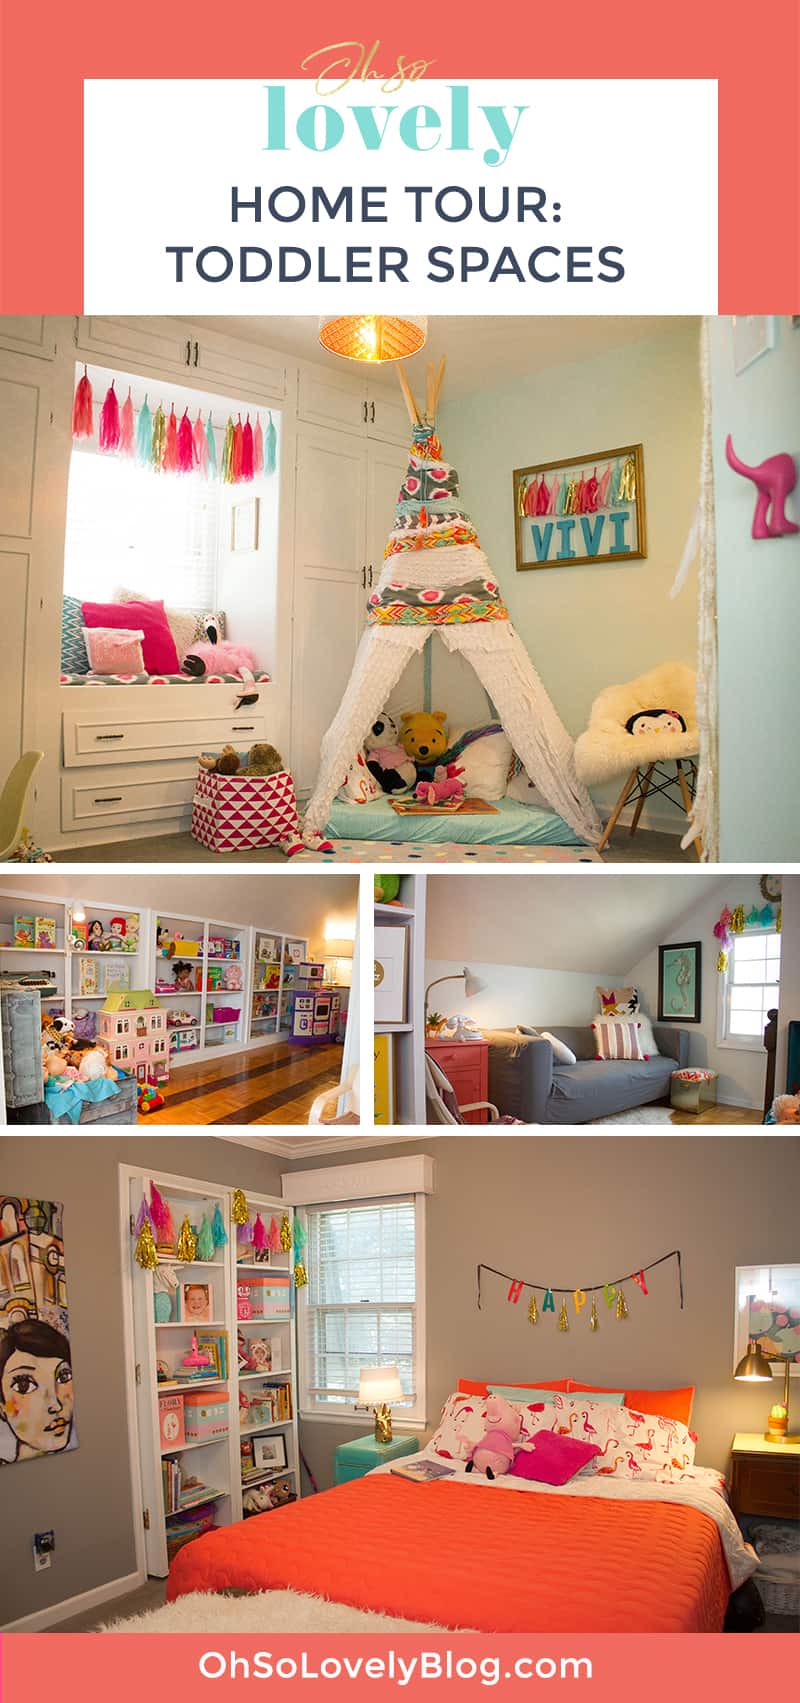 Oh So Lovely blog takes you on a toddler bedroom and play spaces home tour.